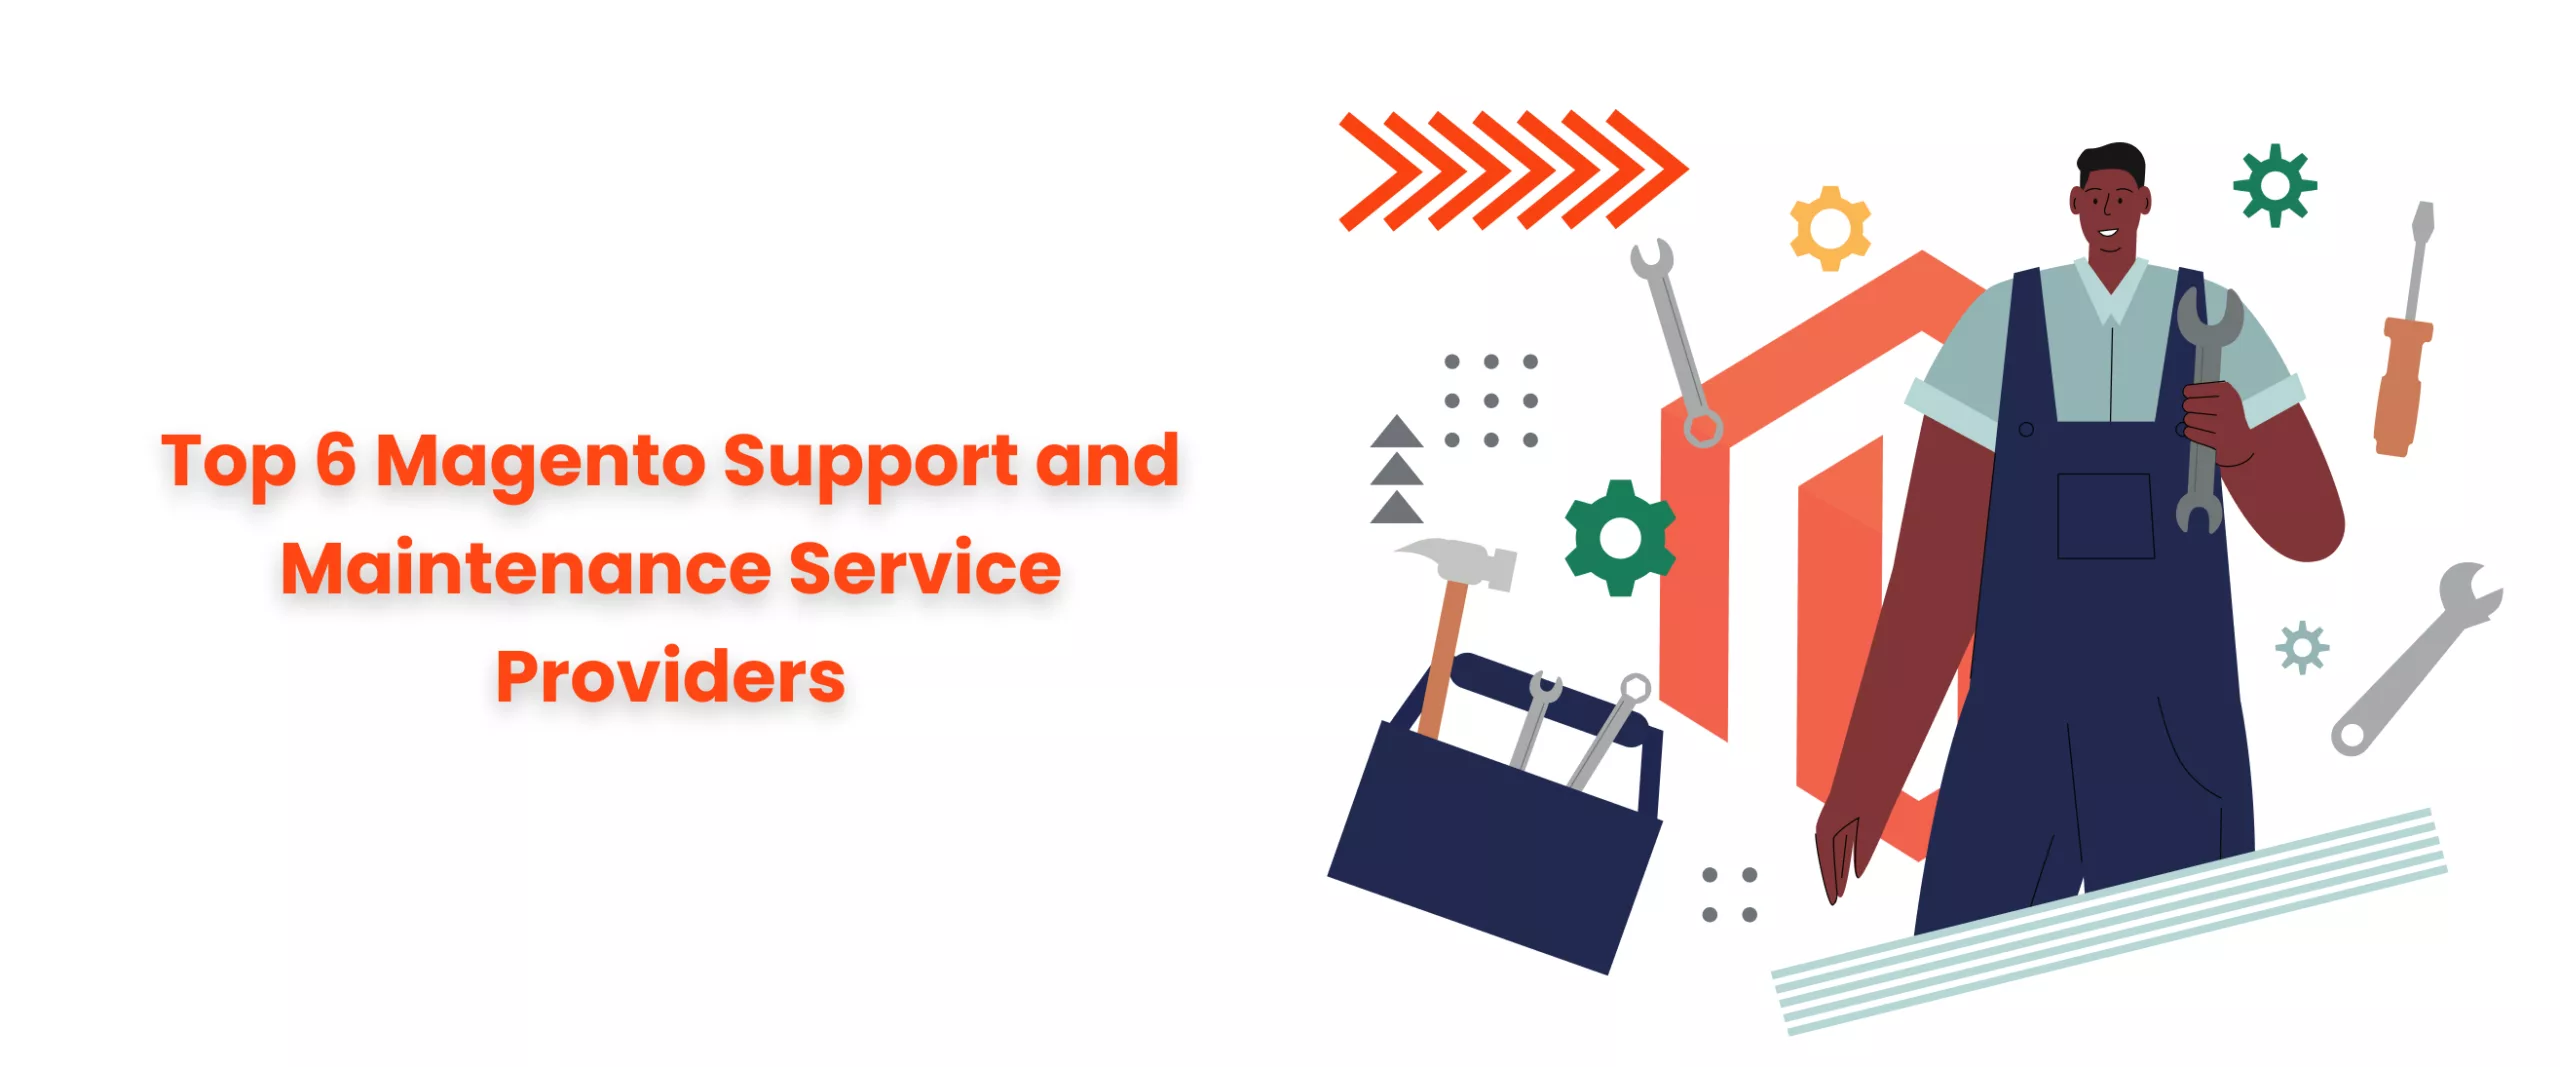 Top 6 Magento Support and Maintenance Service Providers